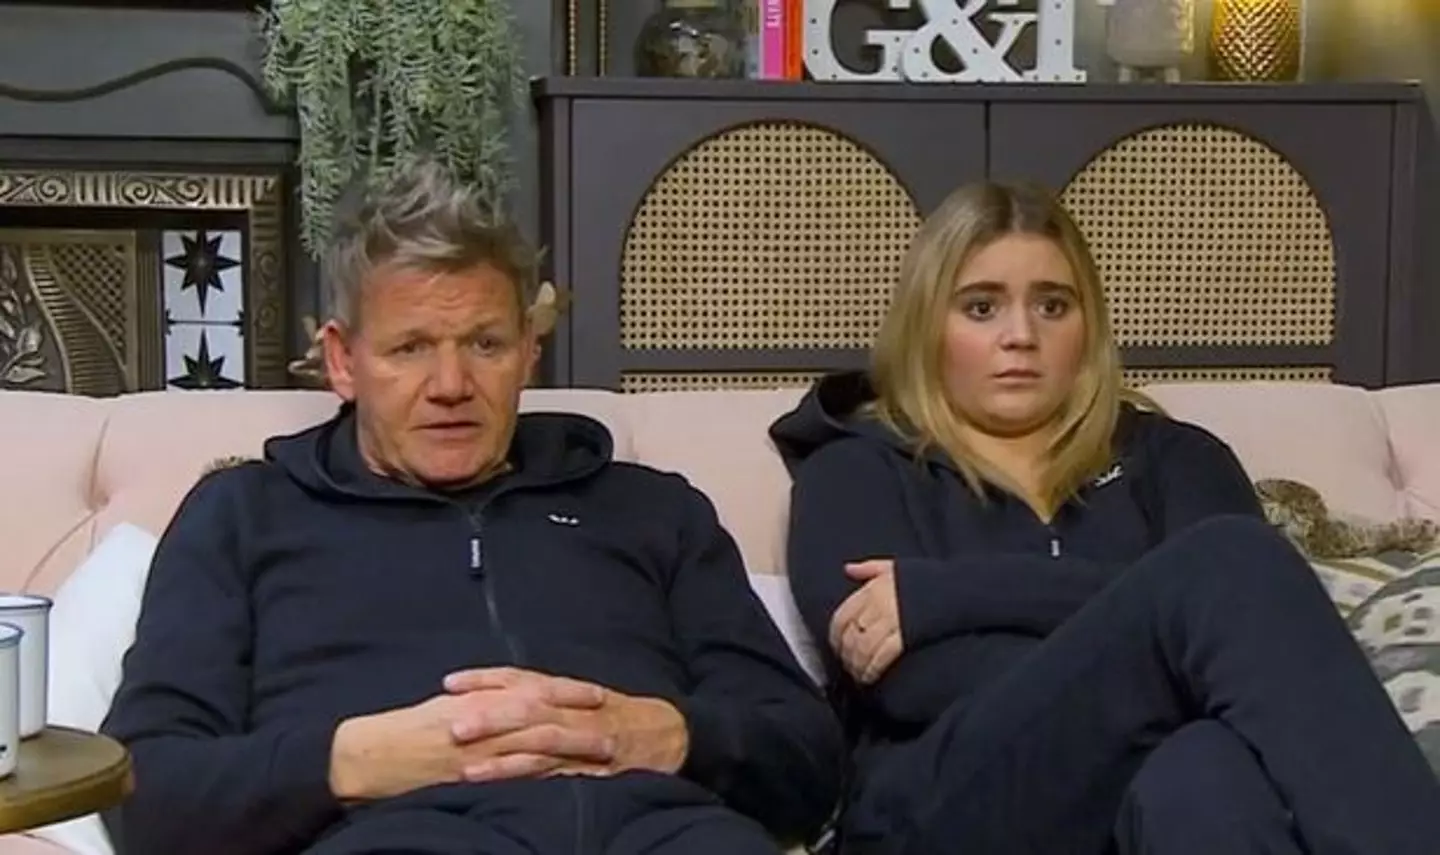 Gordon and Tilly were both emotional.